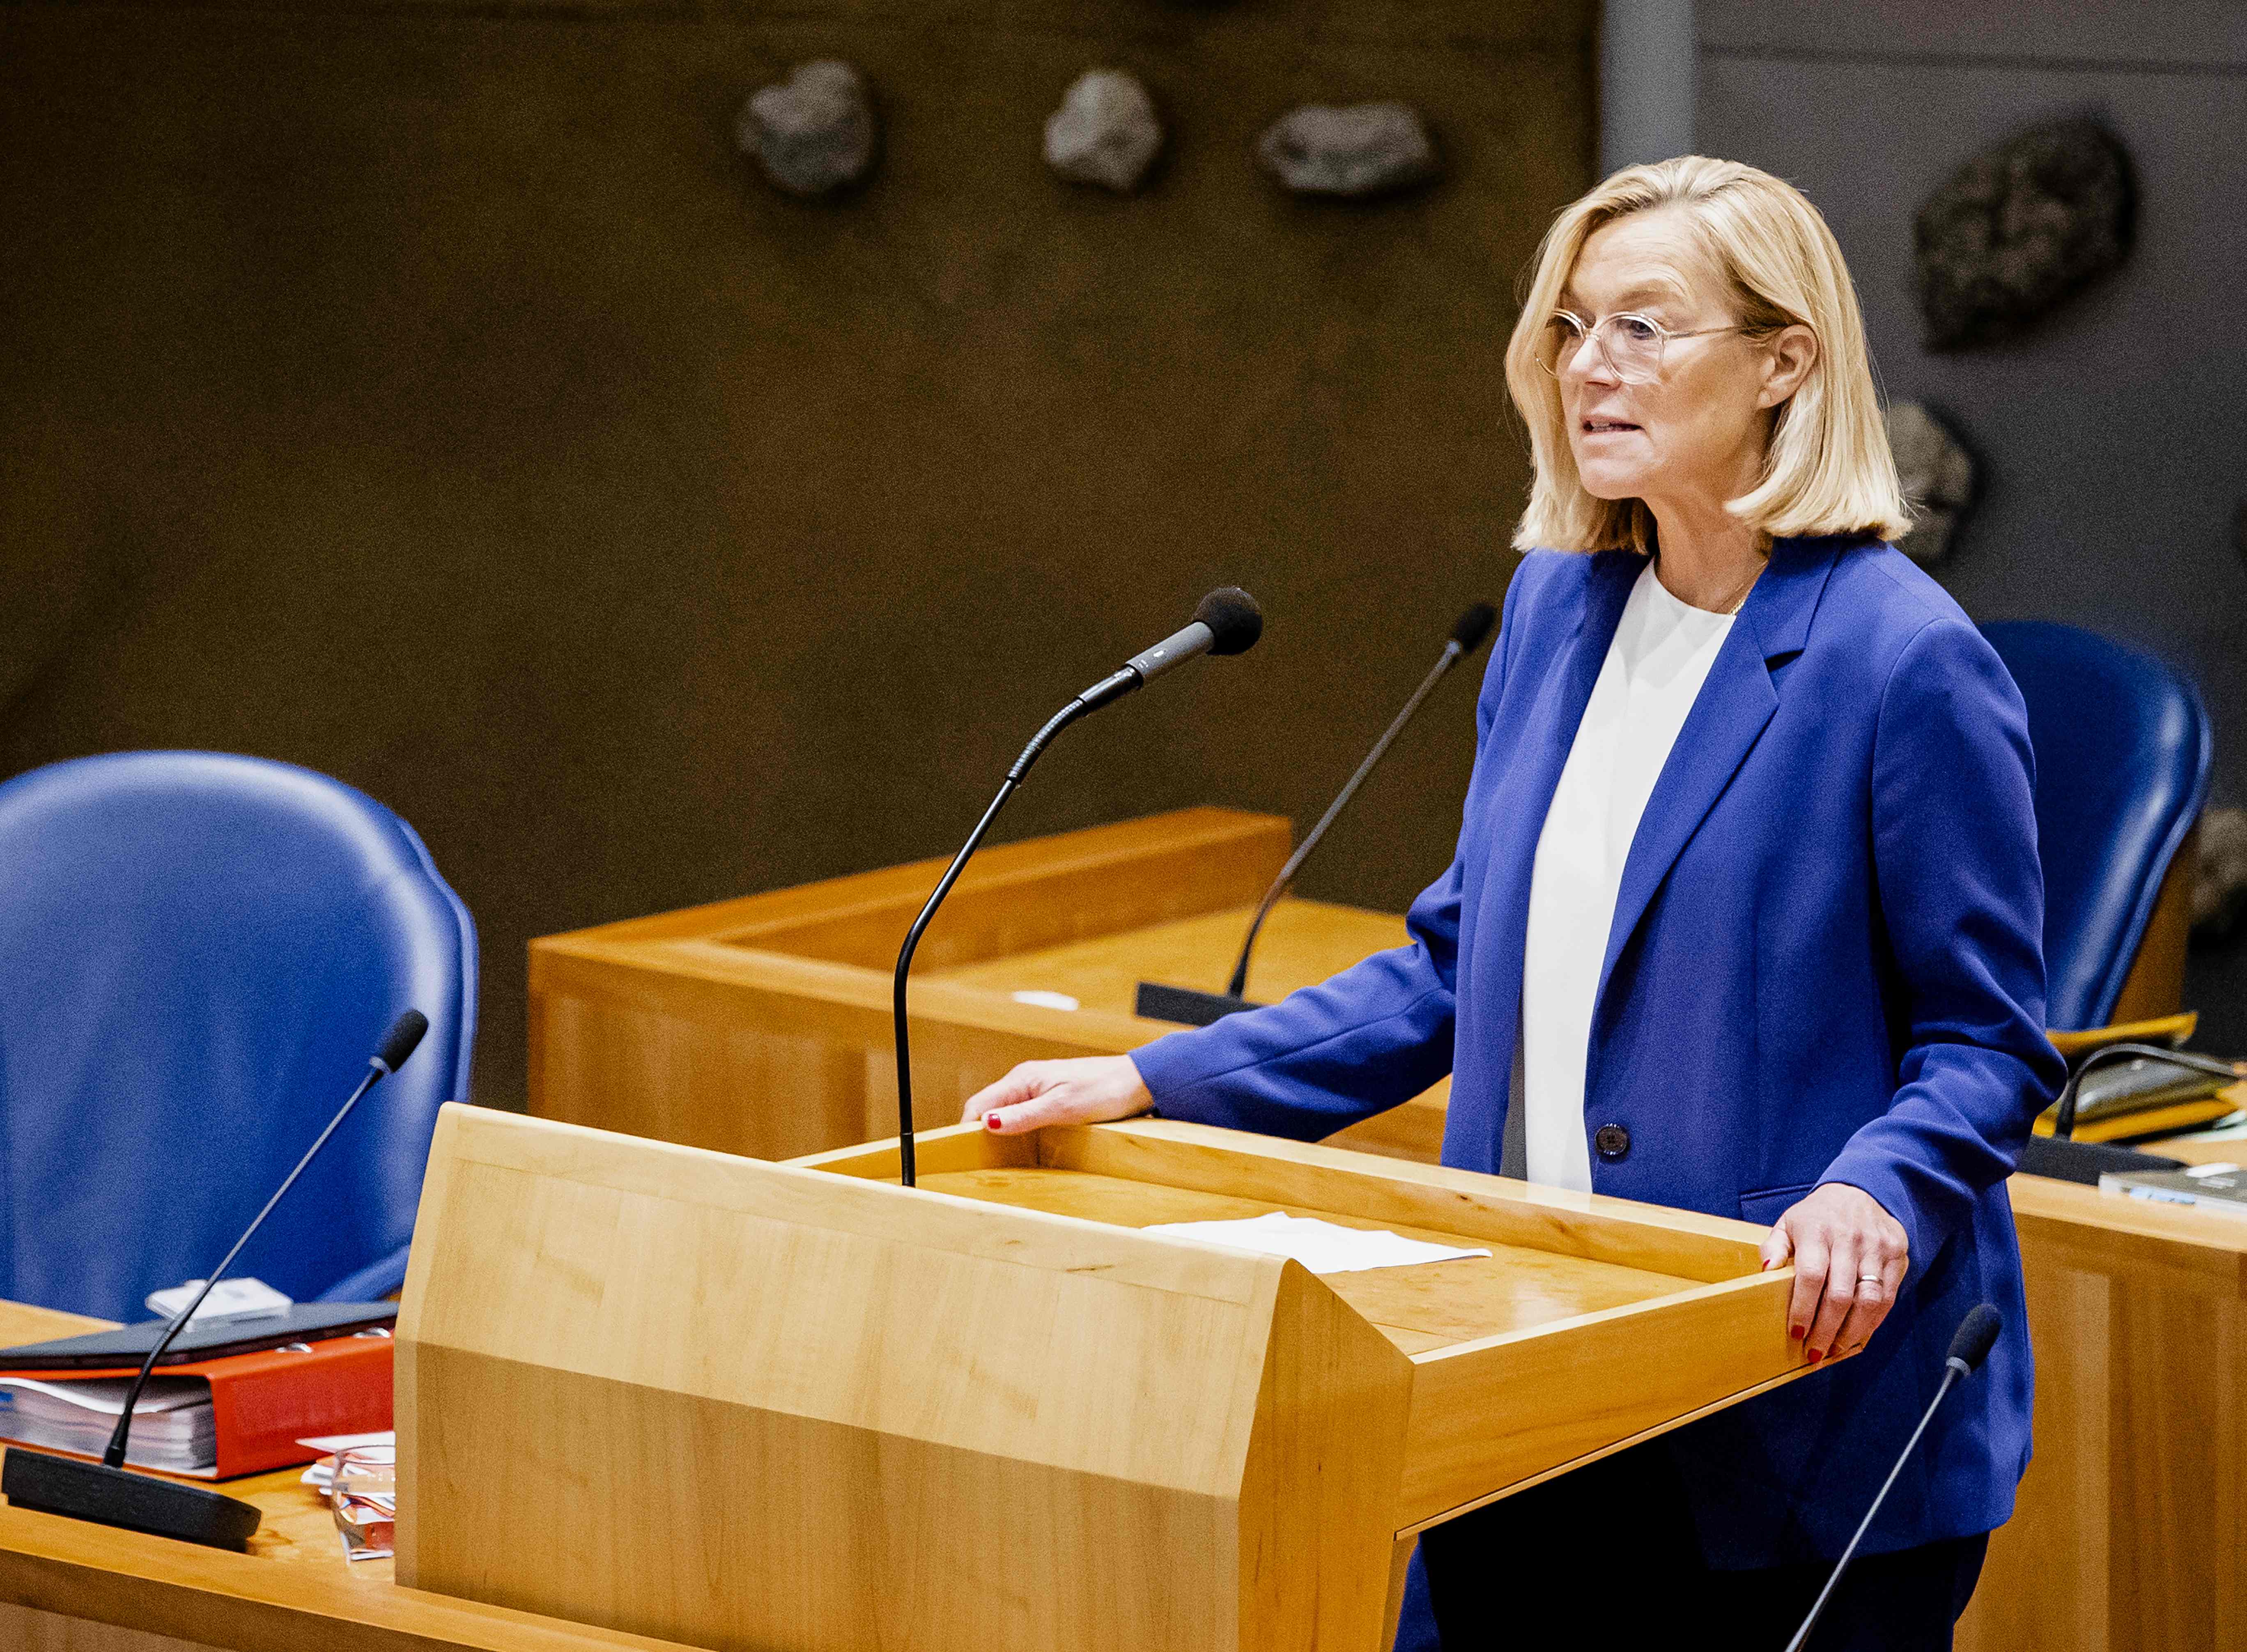 Sigrid Kaag resigned after the majority of the Dutch parliament said she had mishandled the Afghanistan evacuation